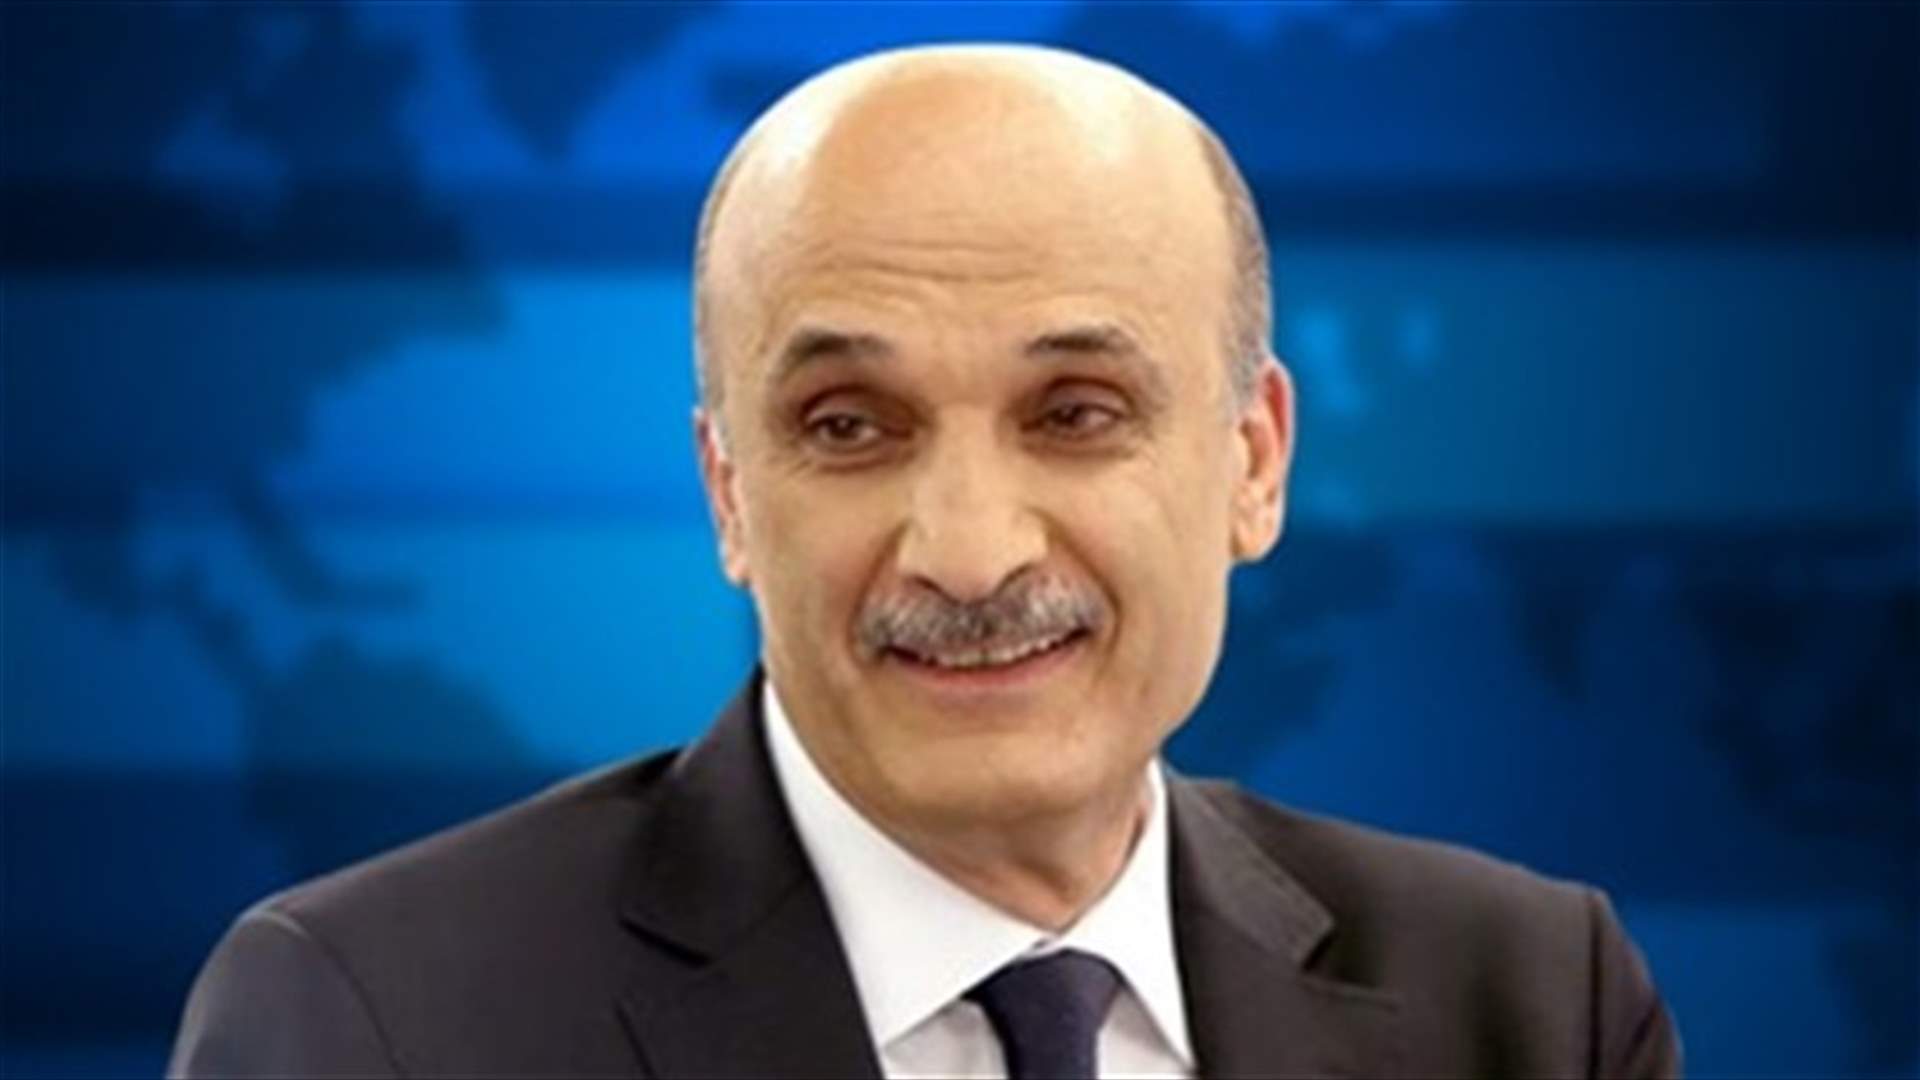 Geagea says some sides are endangering Lebanon’s national security   